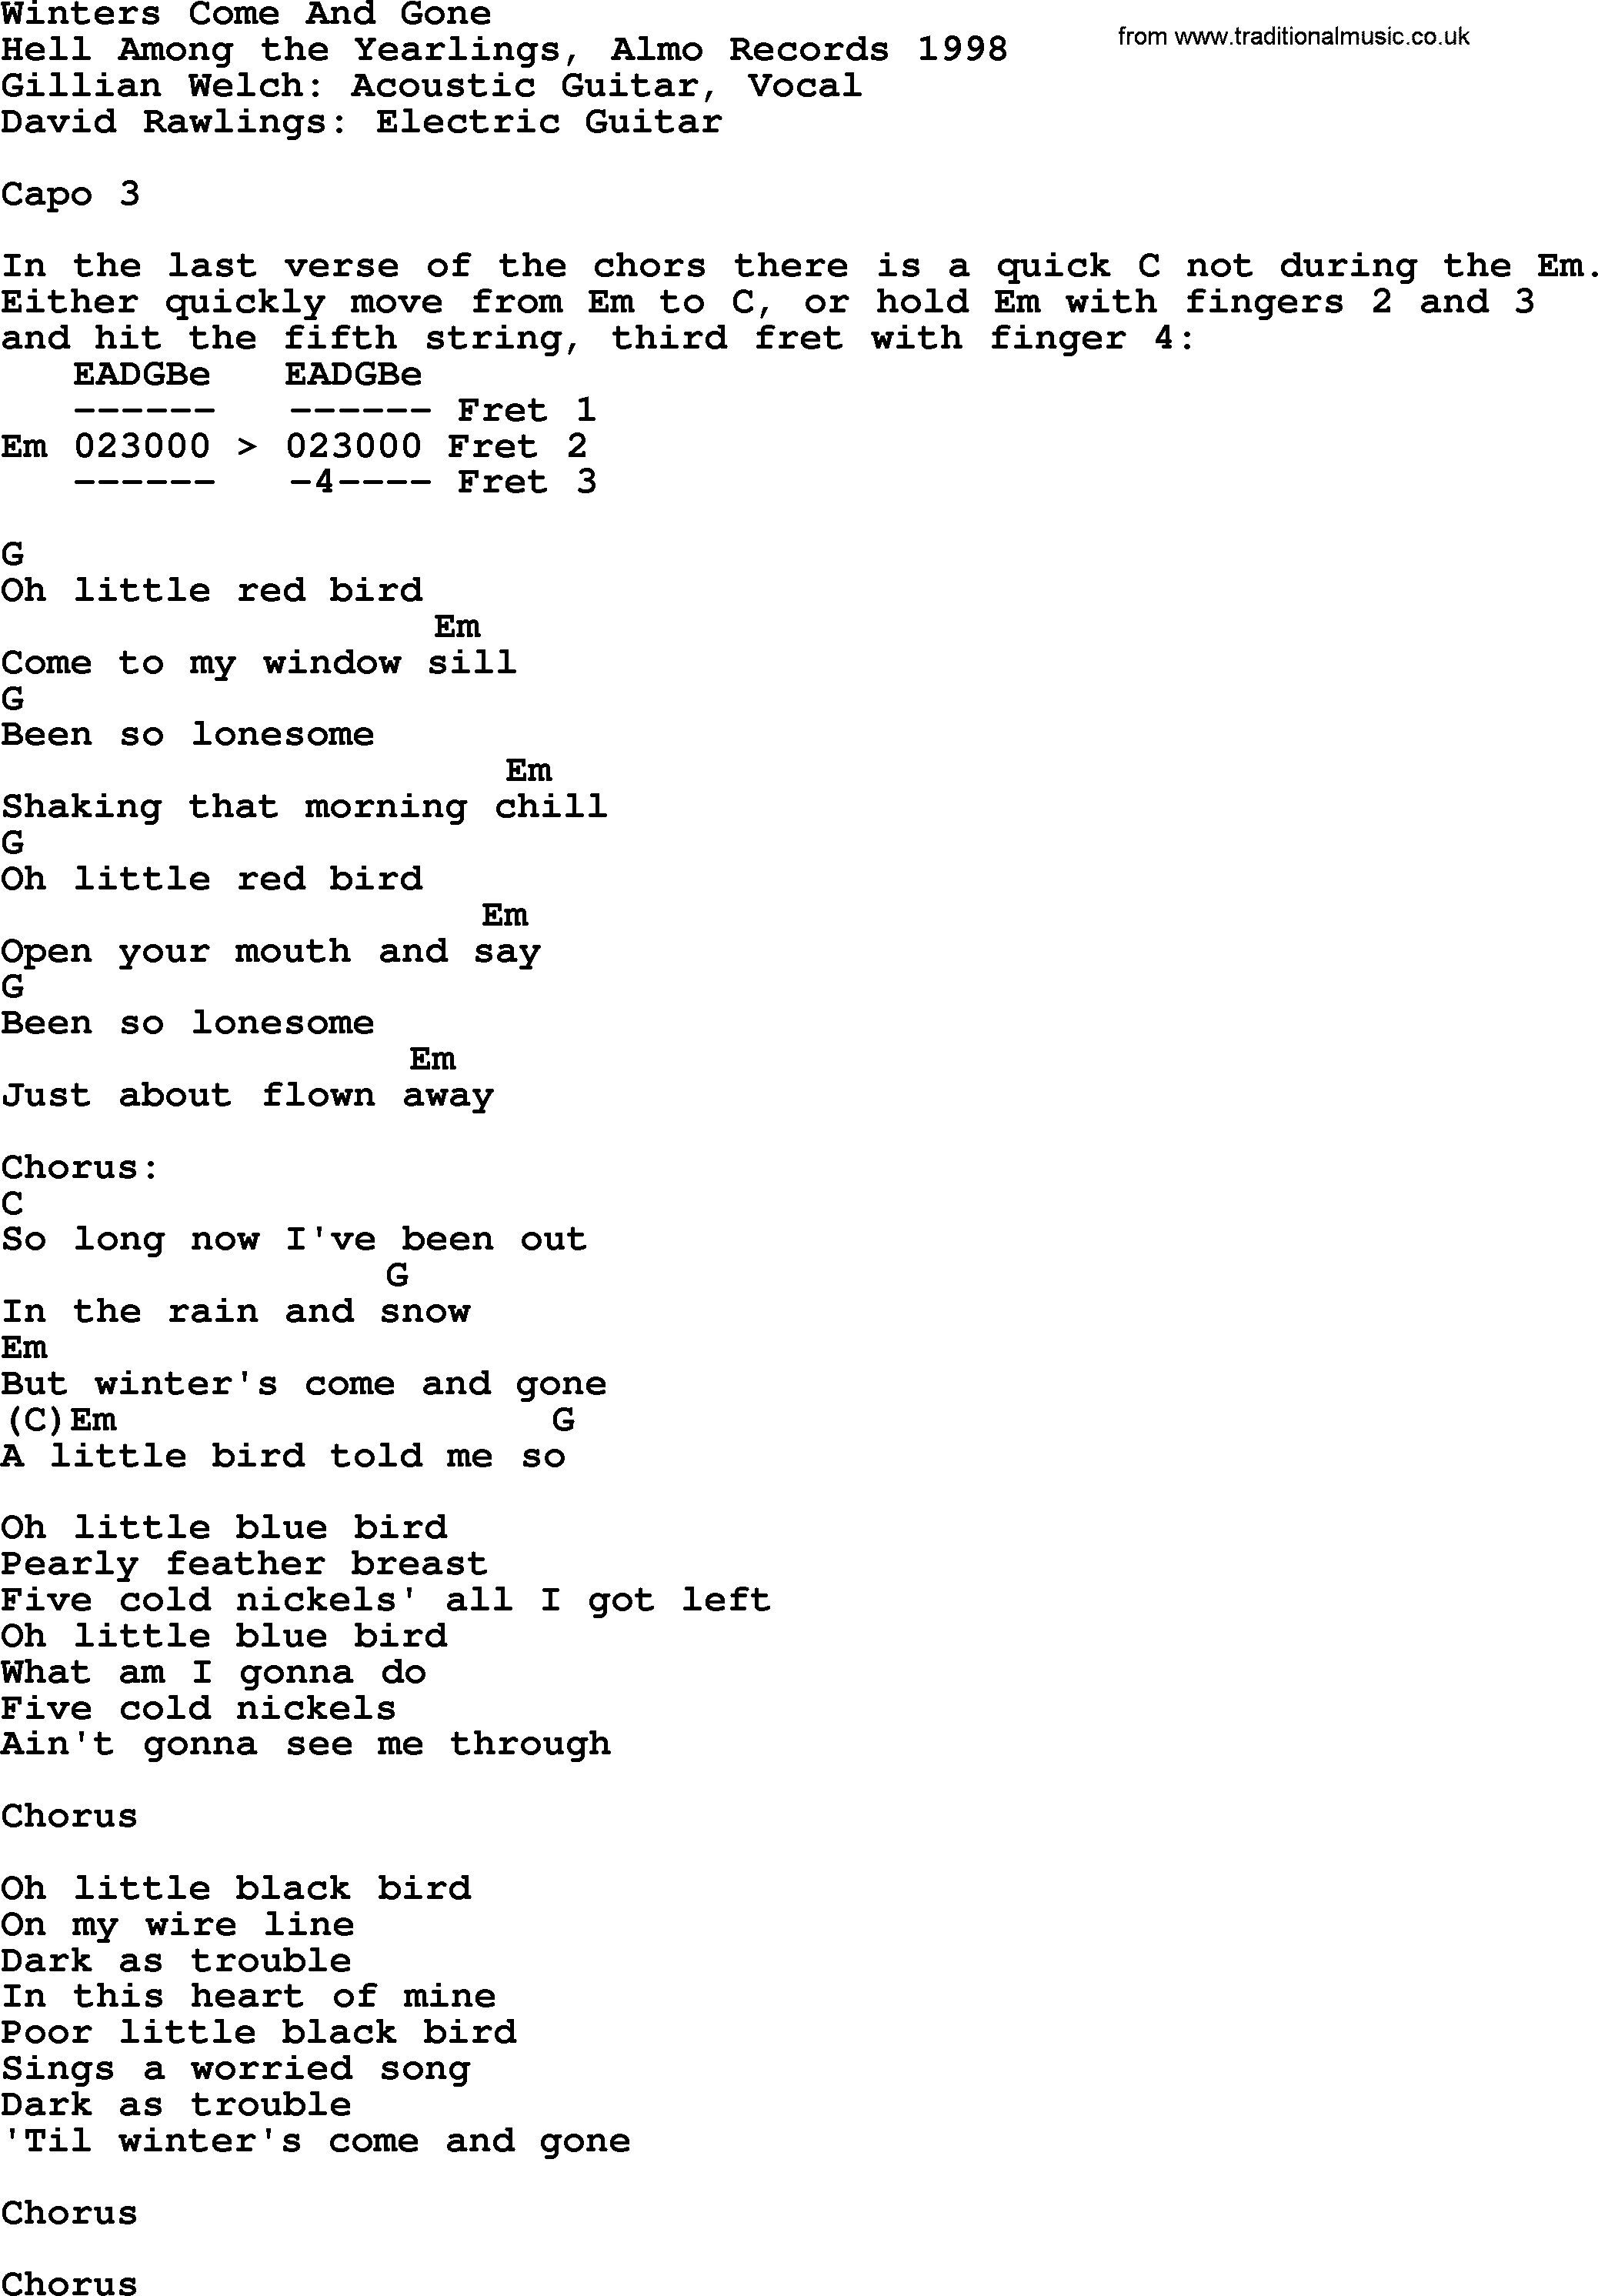 Winters Come And Gone Bluegrass Lyrics With Chords